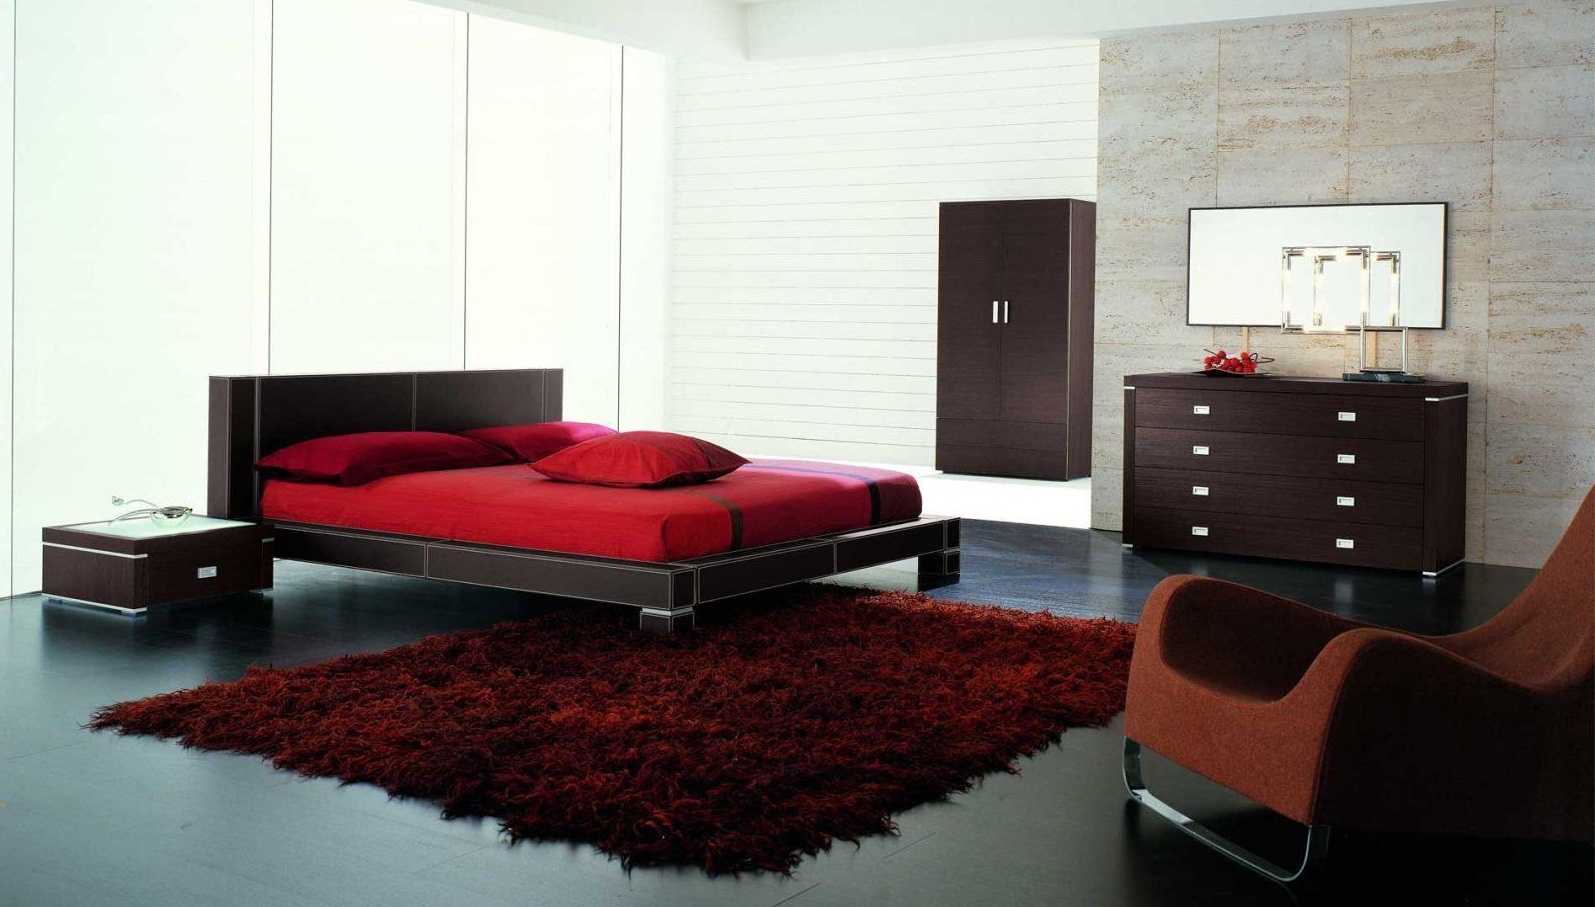 Red Furry Hardwood Awesome Red Furry Rug On Hardwood Flooring In Red Bedrooms Ideas For Young Adults With Beautiful Mirror Wall Mounted Bedroom  27 Enchanting And Awesome Bedroom Ideas For Young Adults